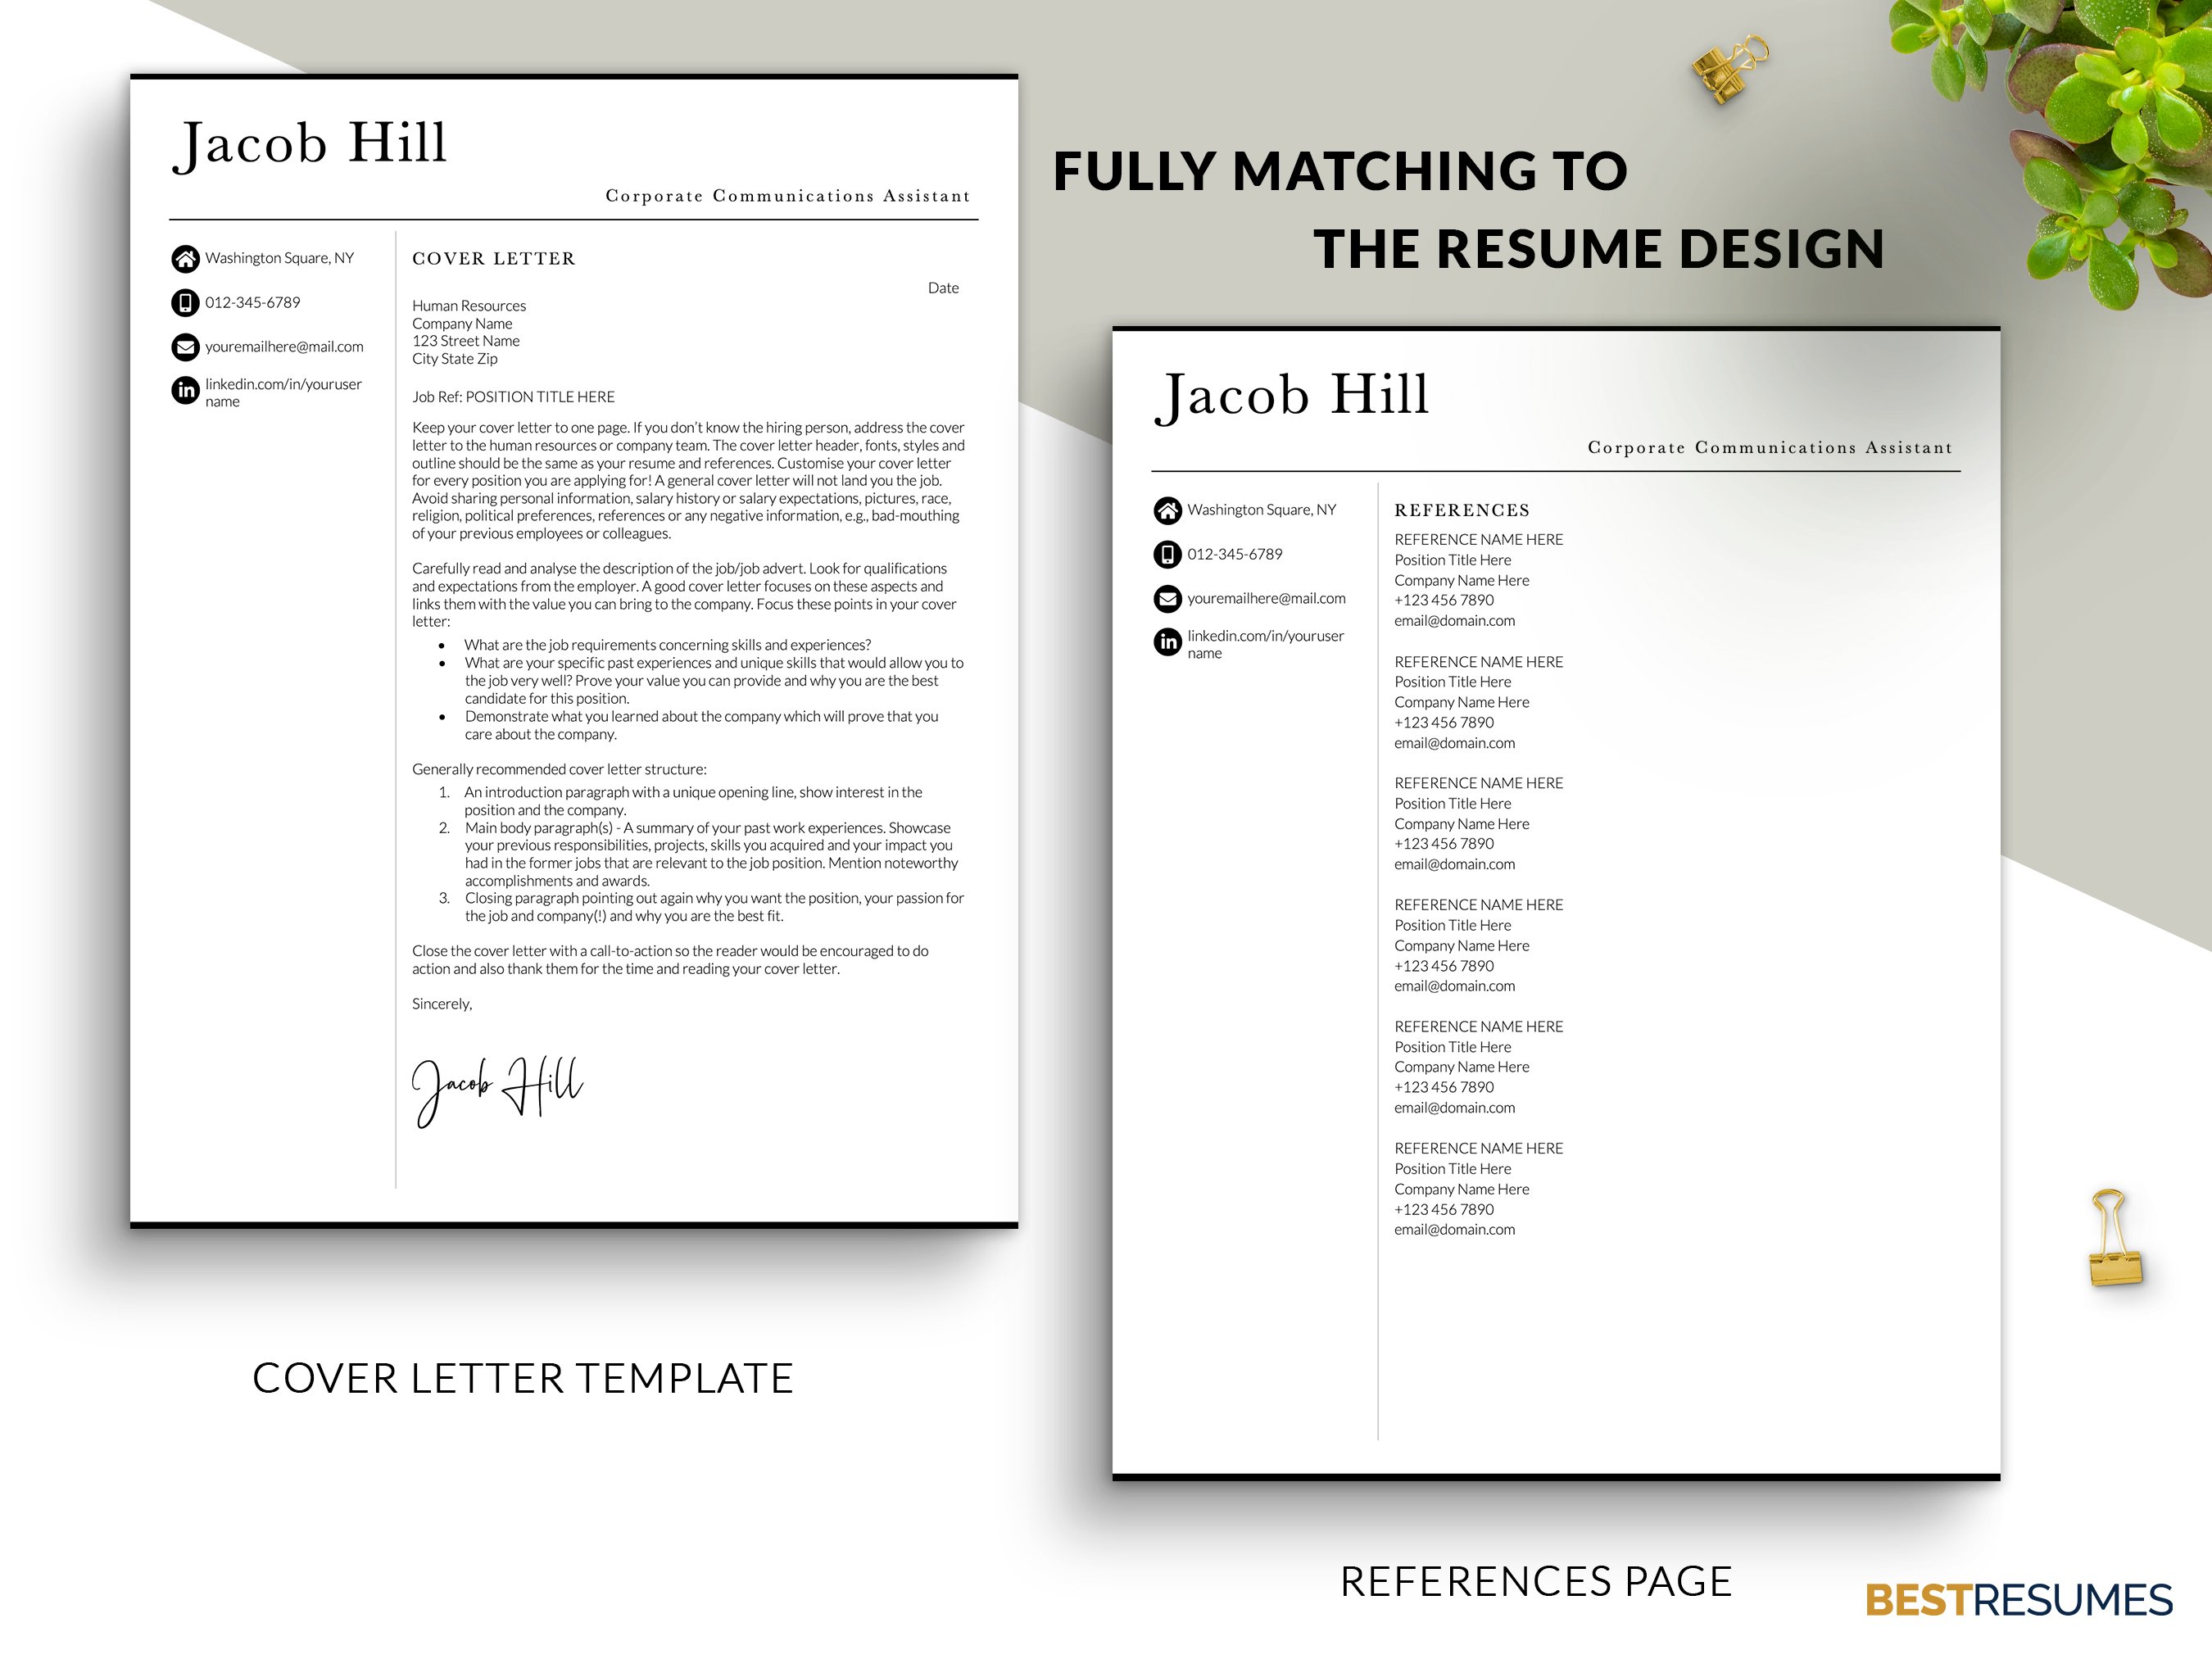 marketing communications cover letter references cv resume template jacob hill 921